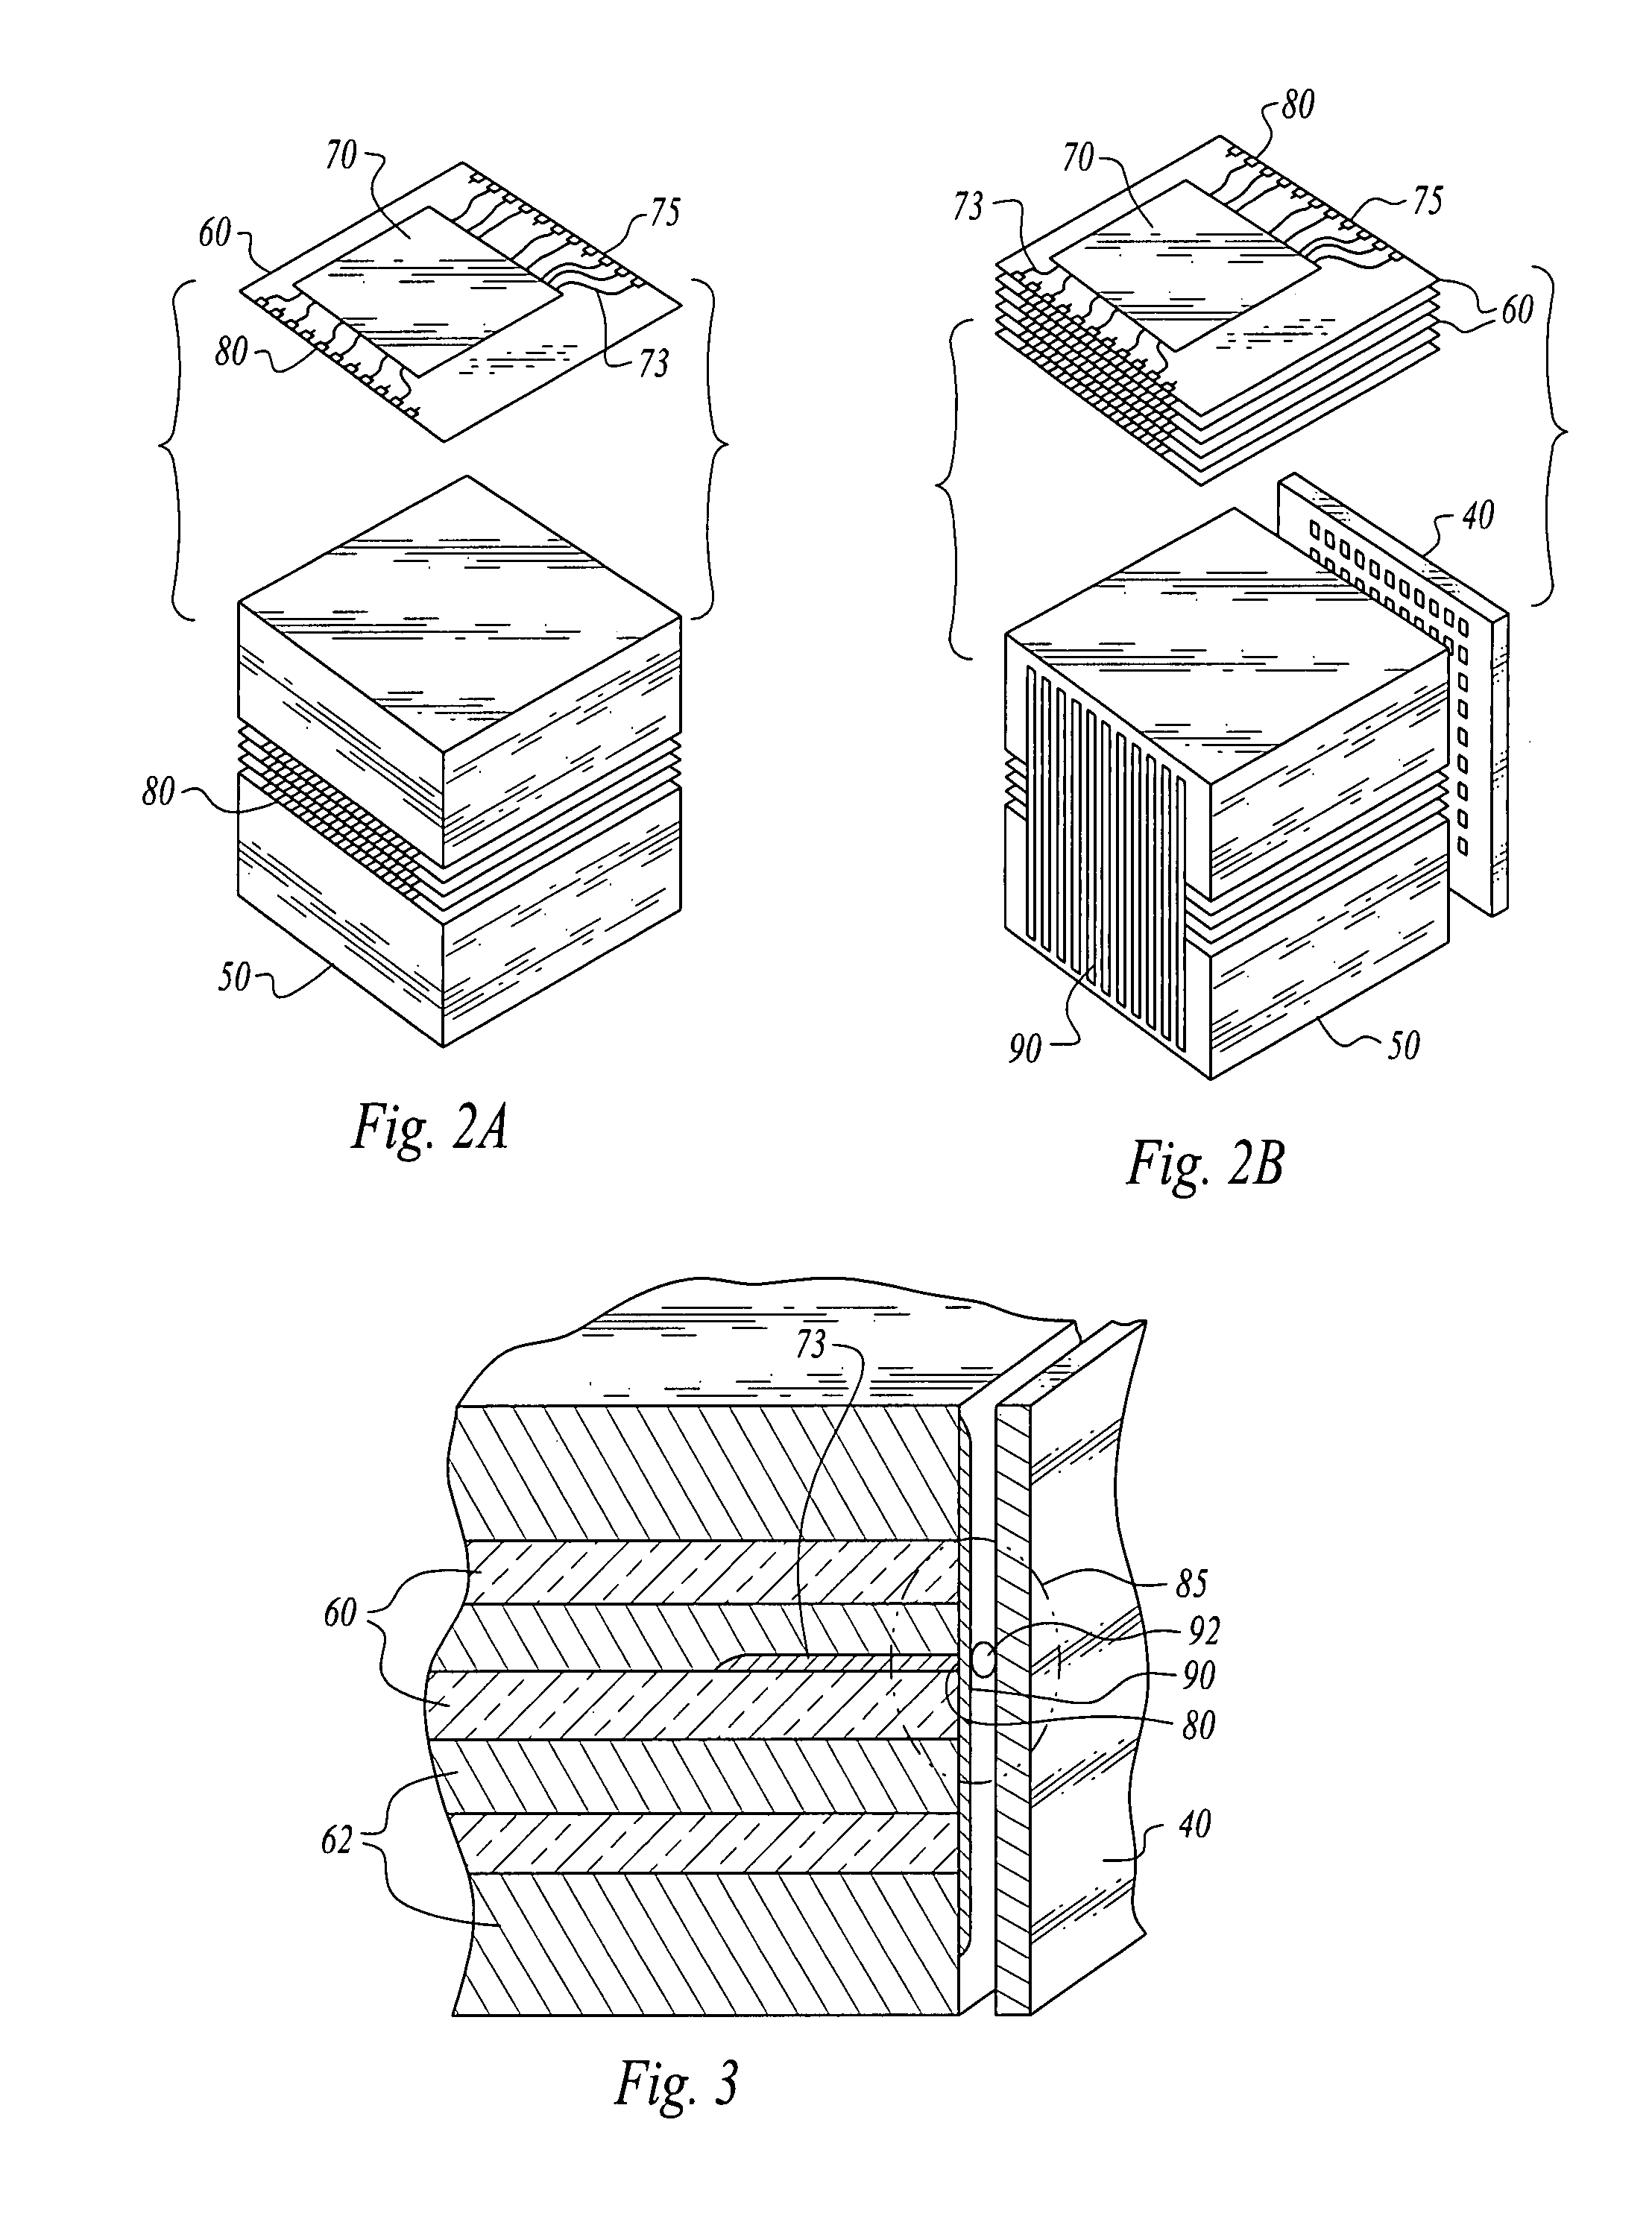 Three-dimensional ladar module with alignment reference insert circuitry